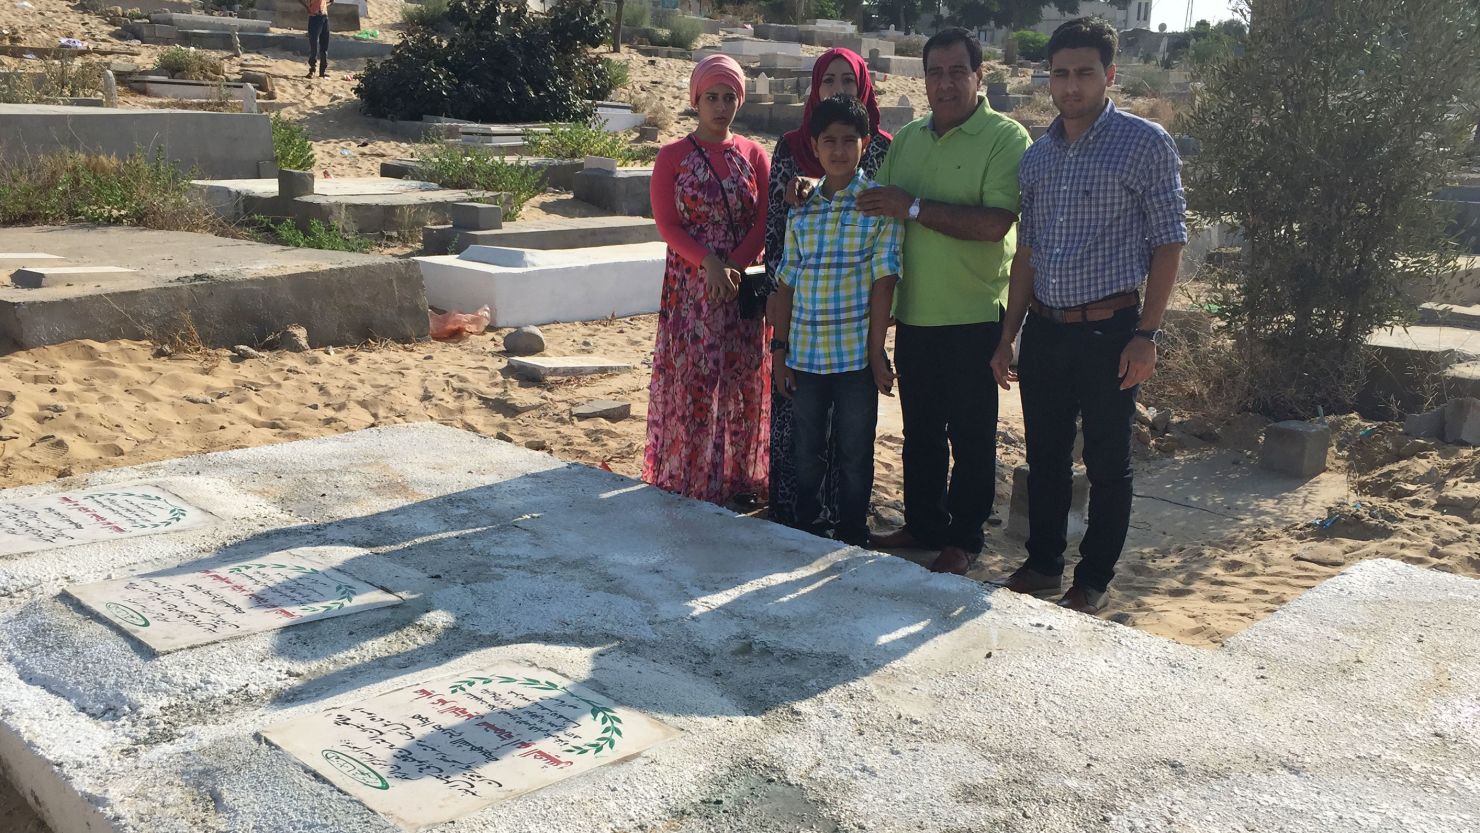 Dr. Izzeldin Abuelaish, with his children, visiting the graves of his daughters who were killed on January 16, 2009.